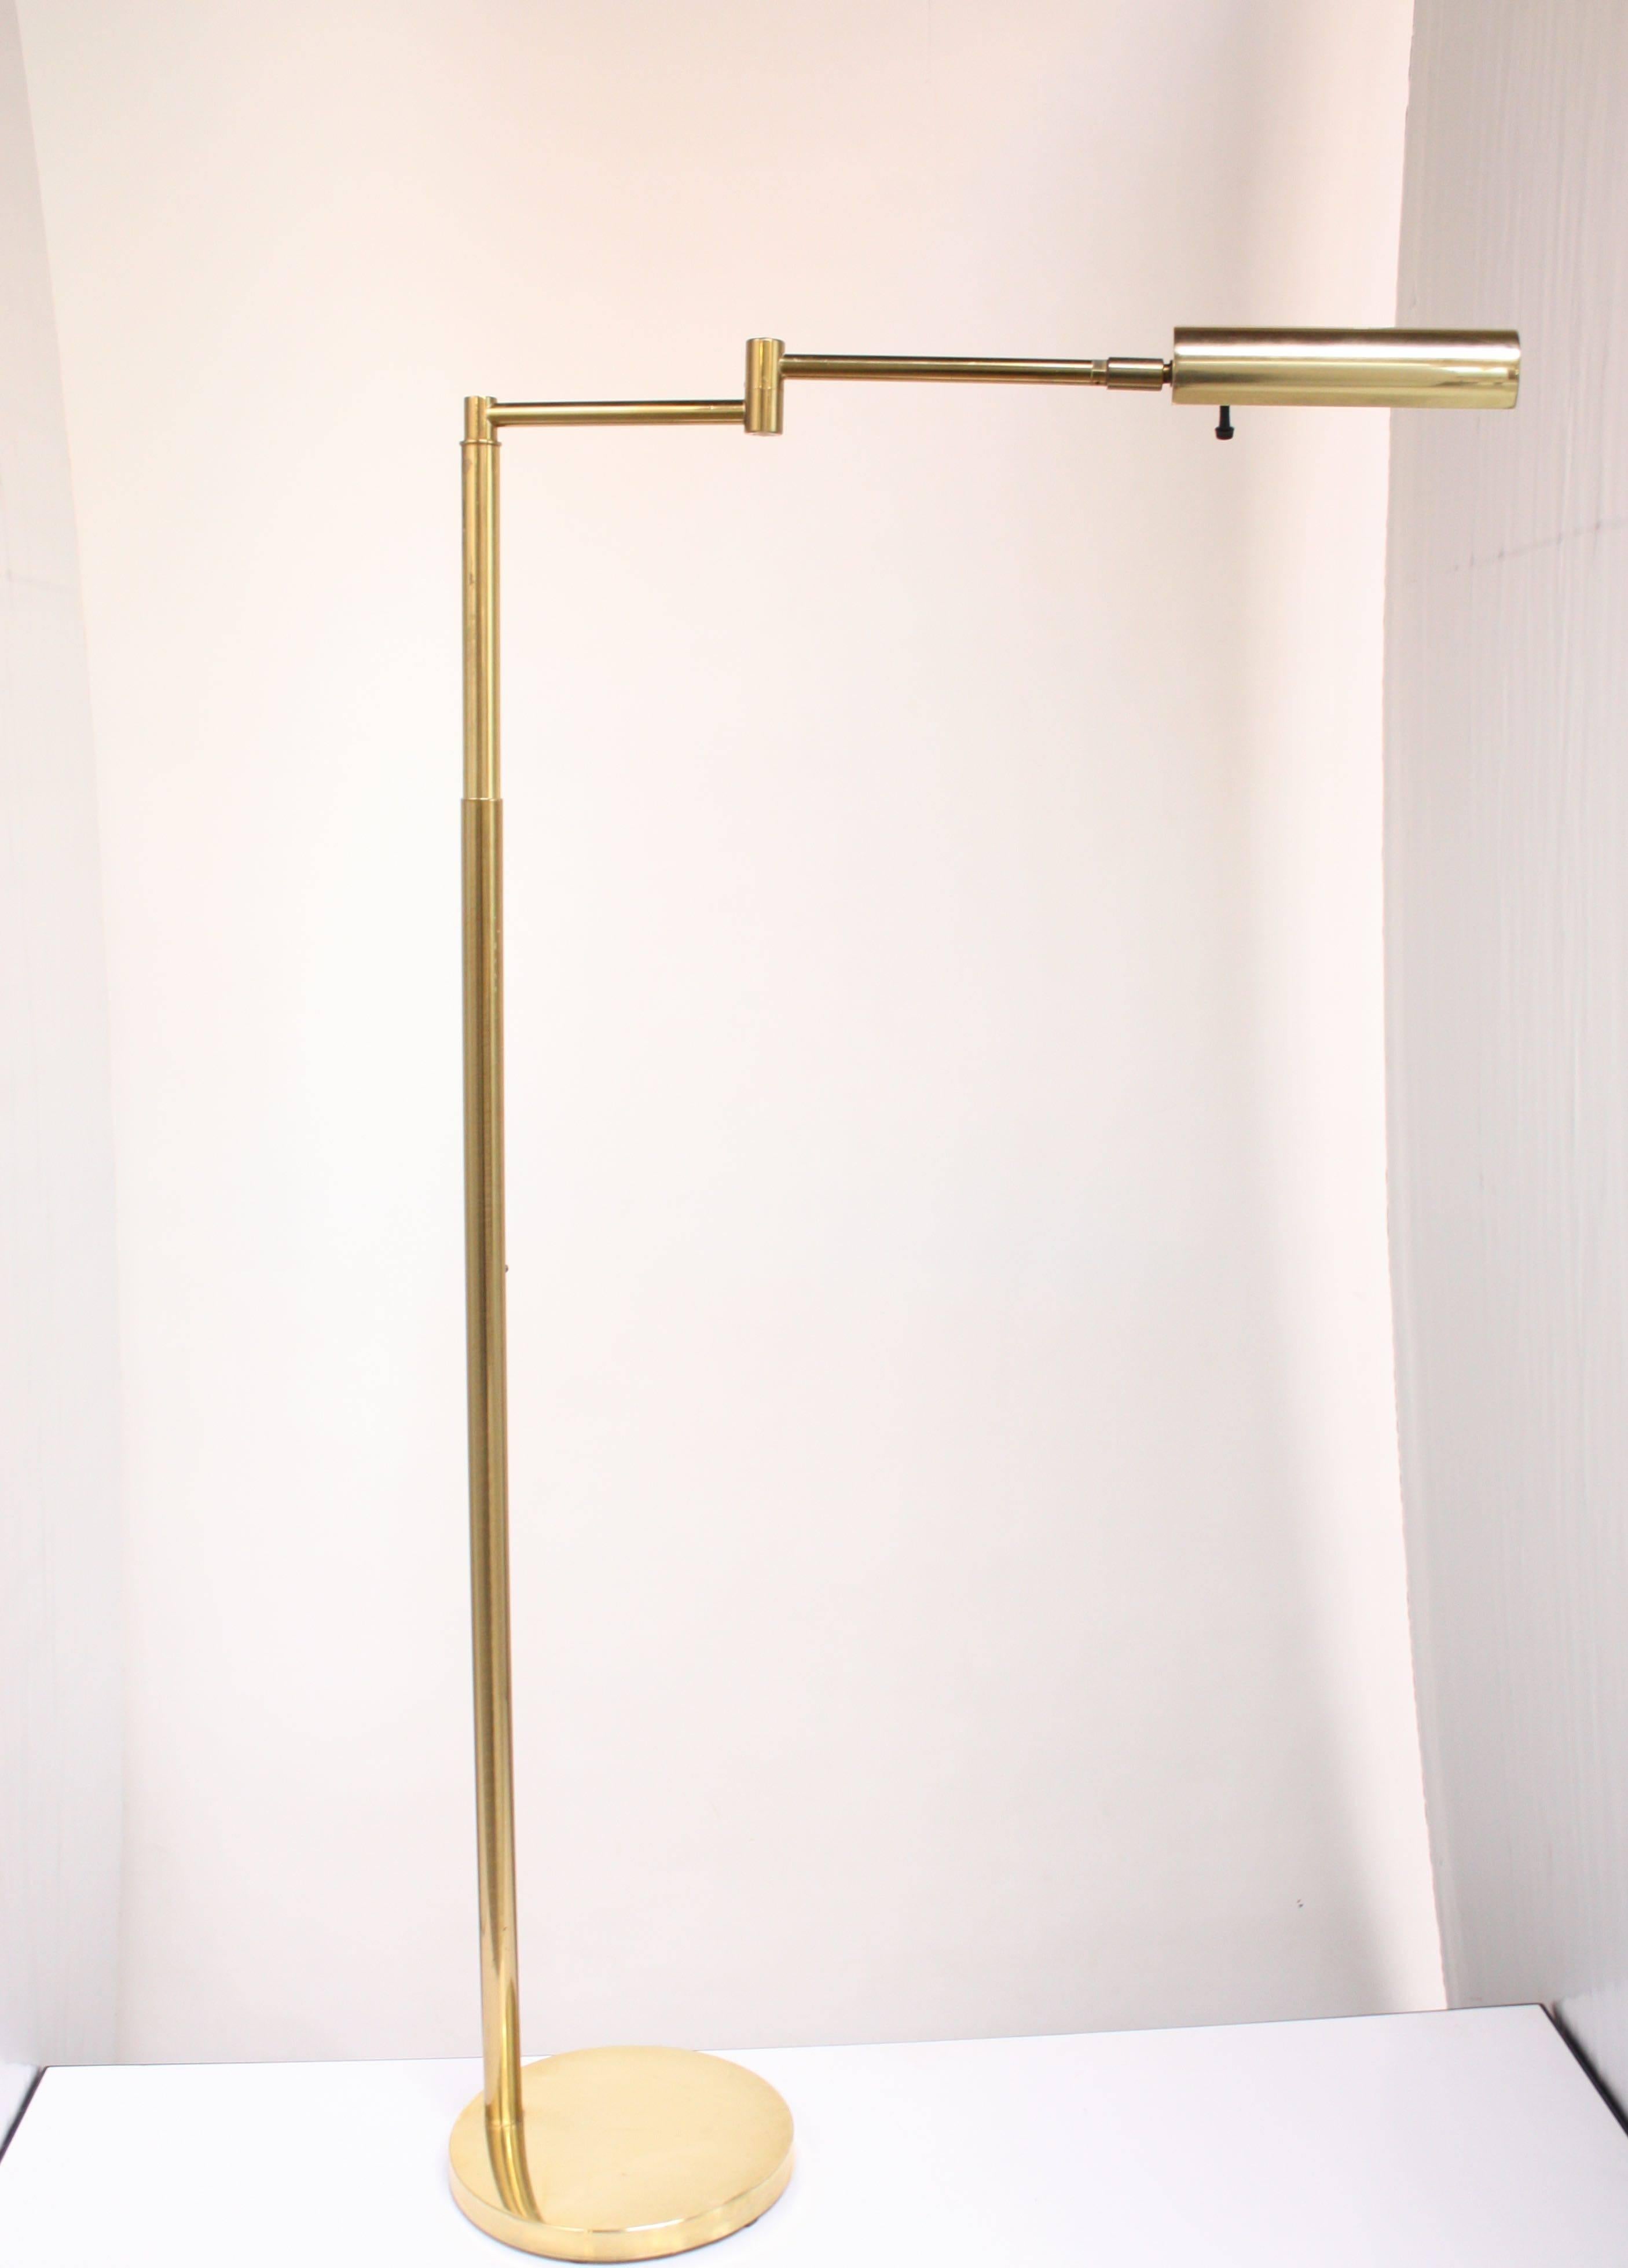 1950s brass floor Lamp by Koch & Lowy composed of a telescoping / swiveling arm and a full 360 degree adjustable shade. Additionally the height can be lowered by 10